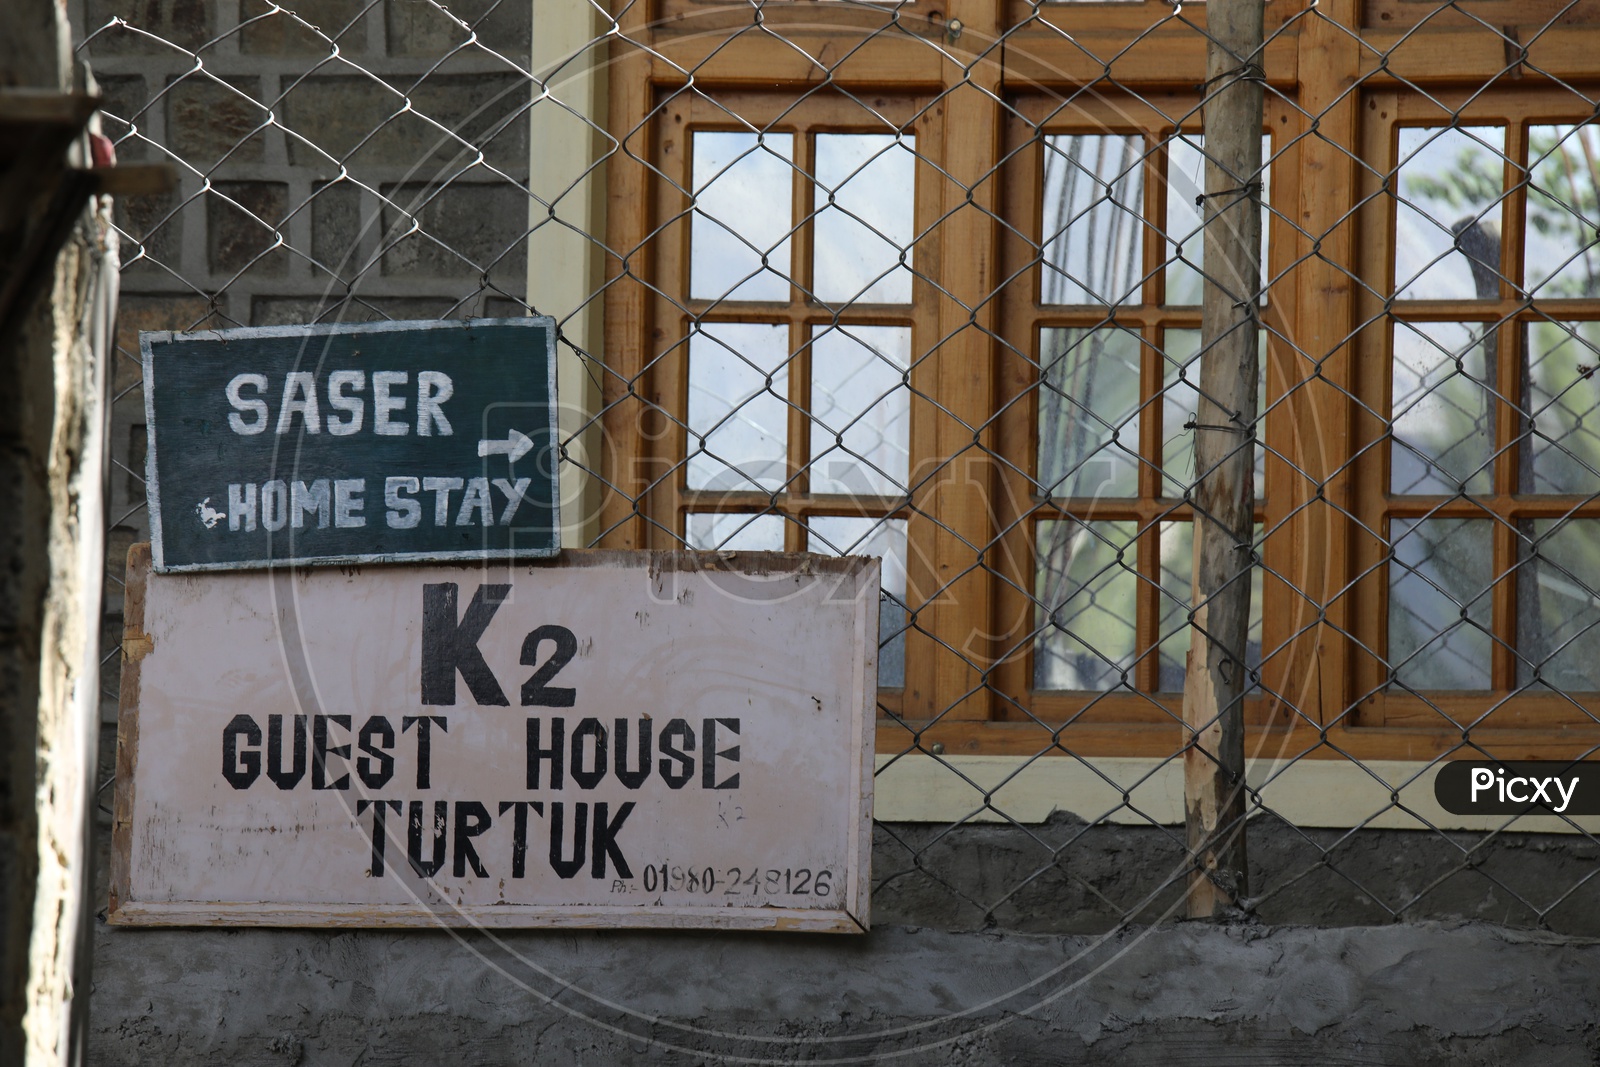 Saser and K2 Guest House Turtuk Boards in Leh